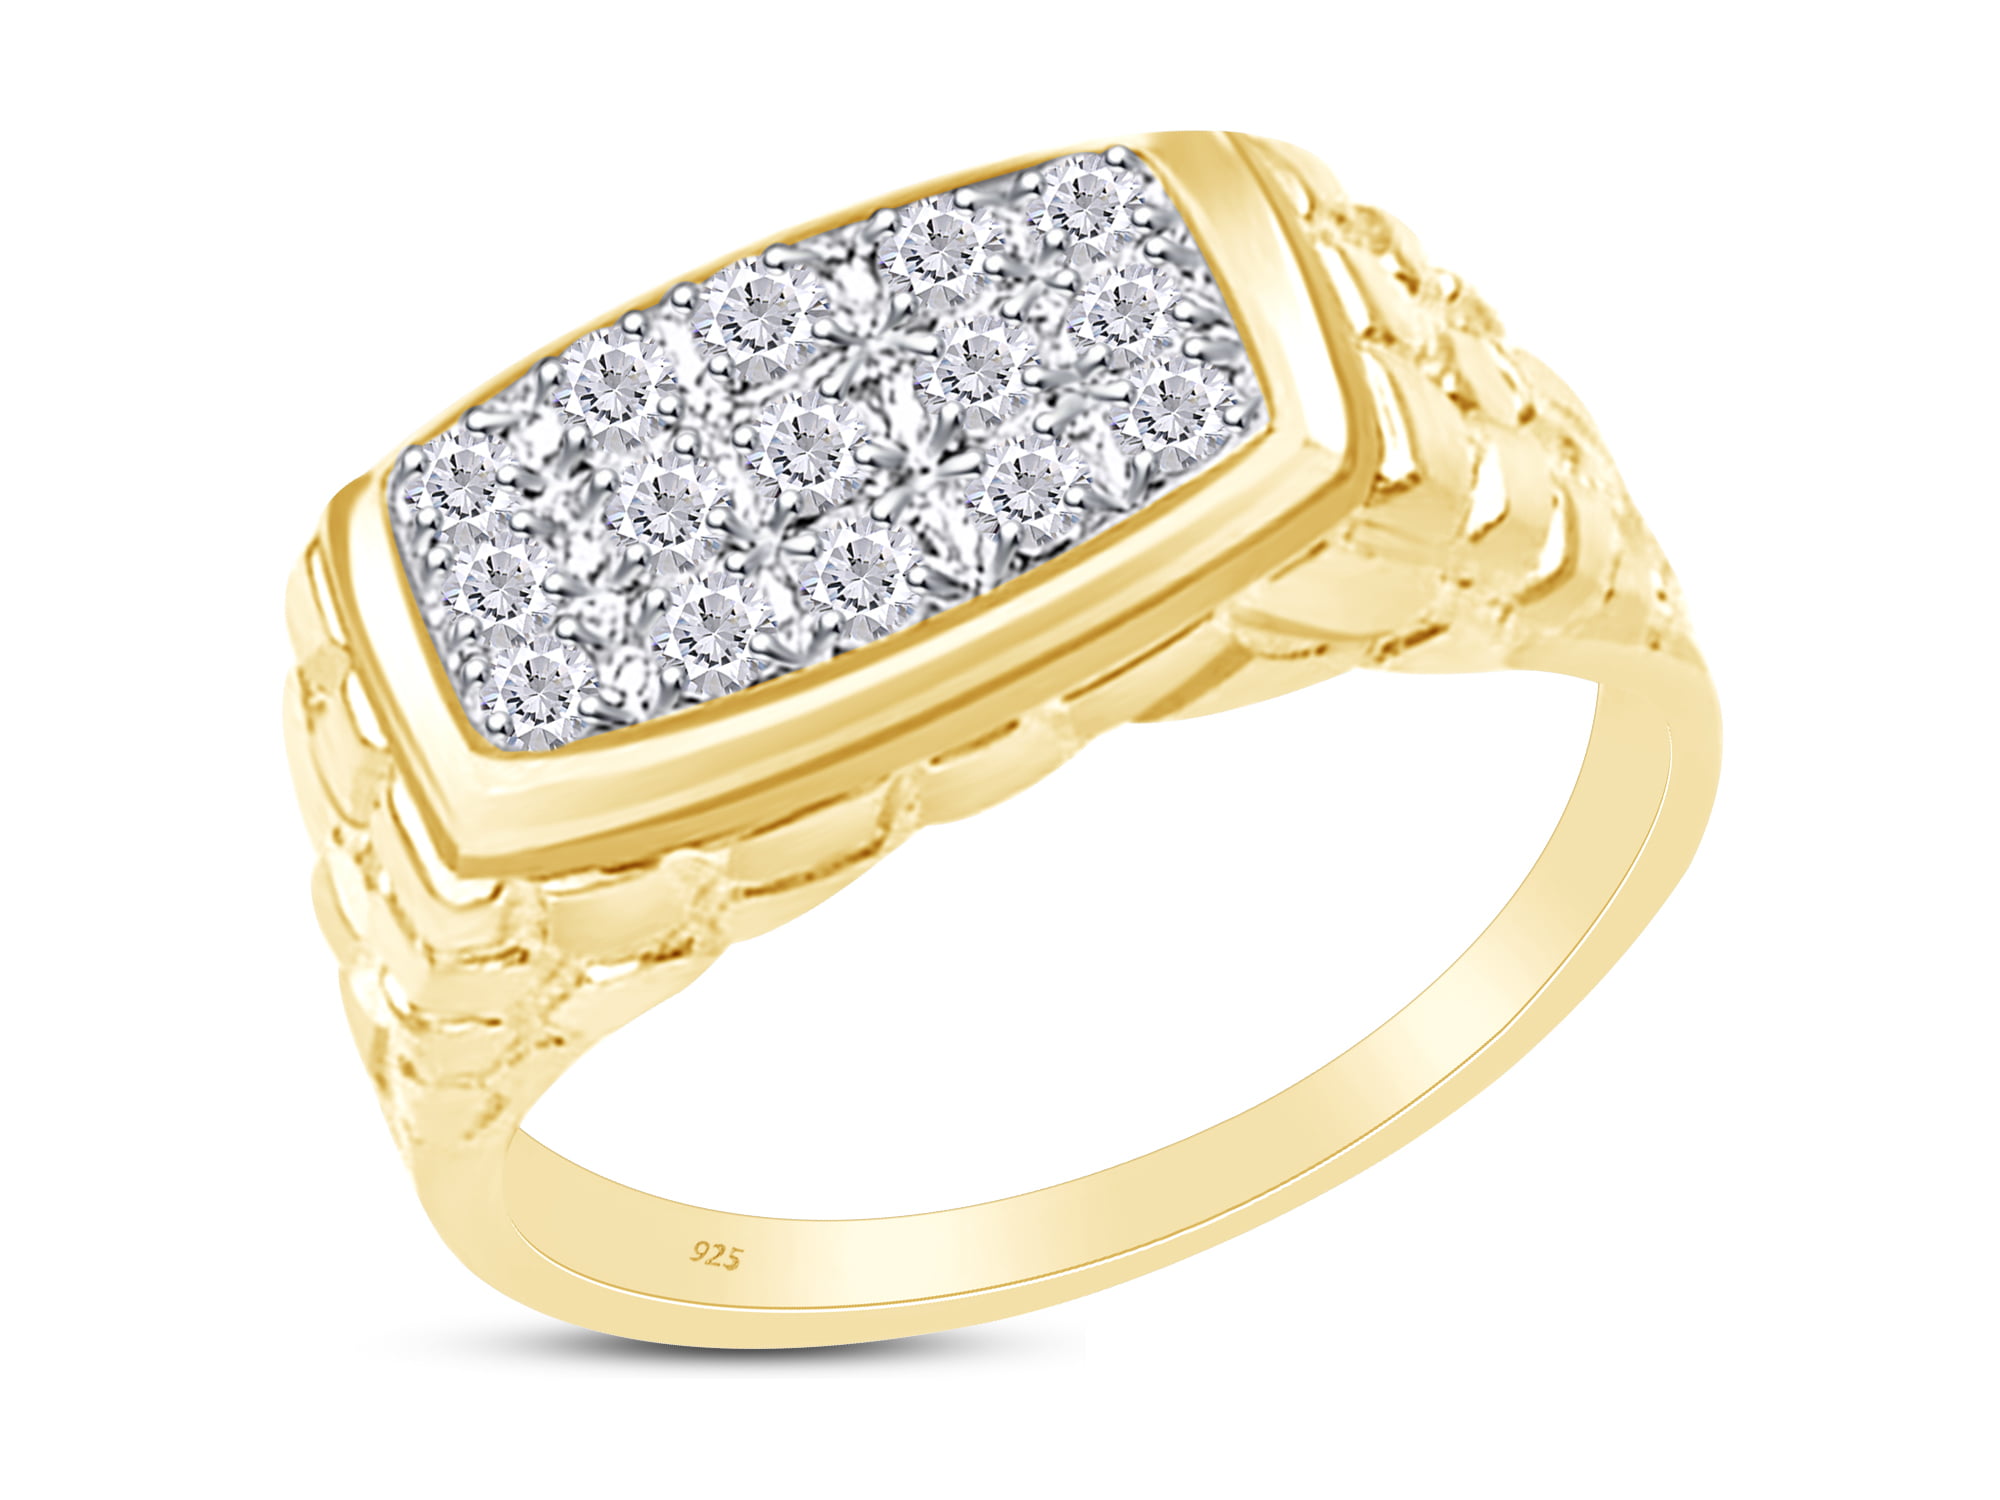 Wishrocks Round Cut White Cubic Zirconia Engagement Ring in 14K Gold Over Sterling Silver 